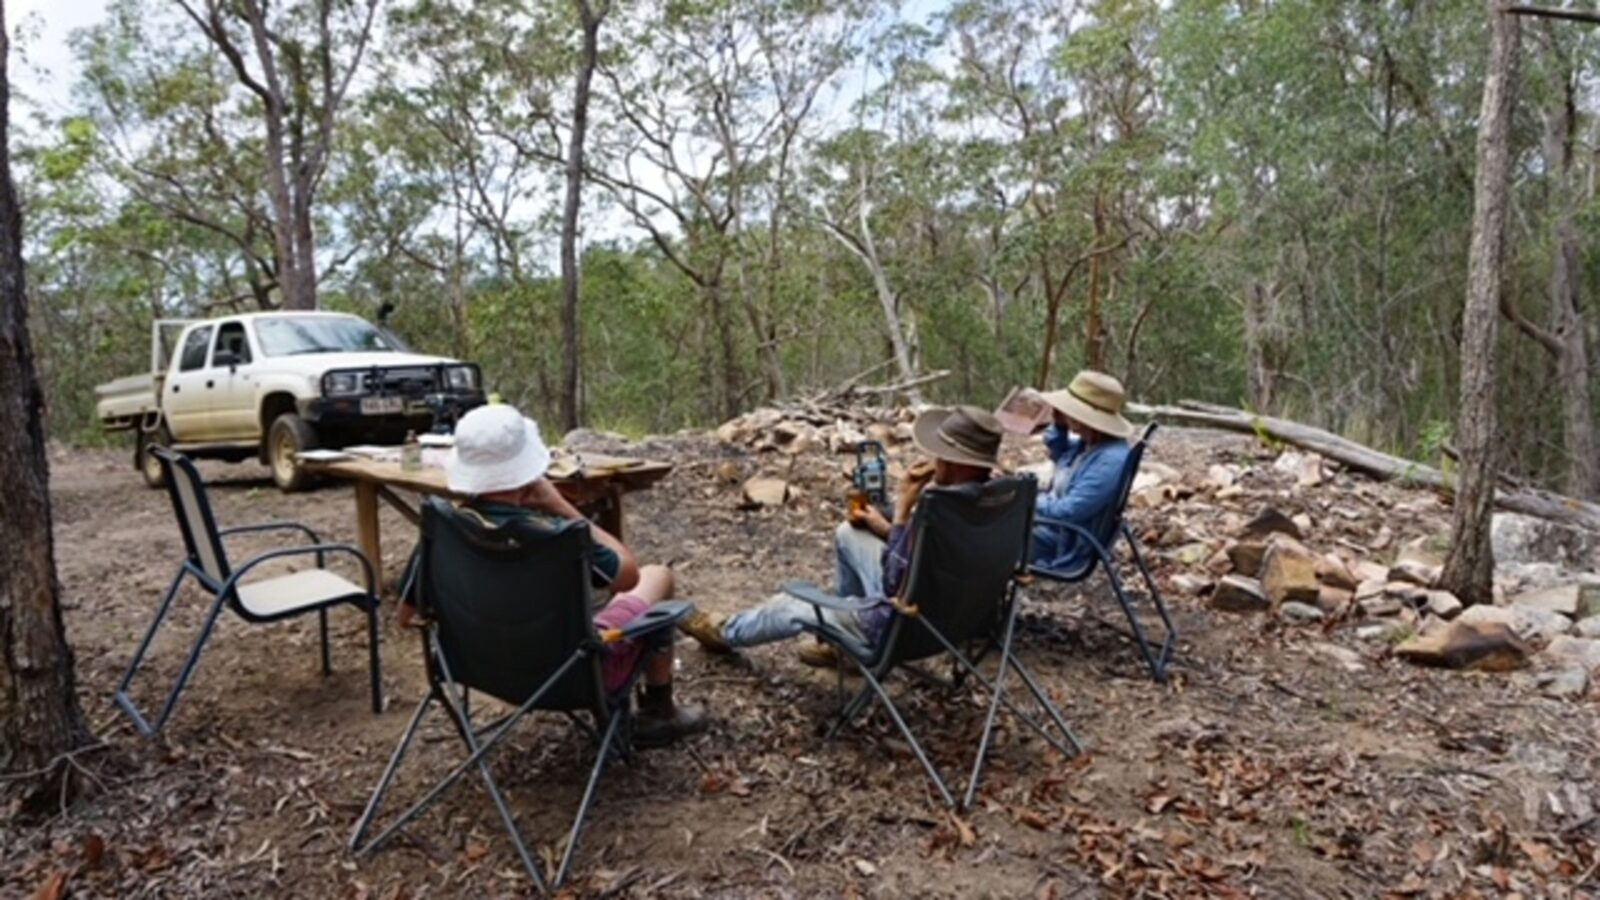 Relax and get back to nature at the Mt Nukka Bush Camp.